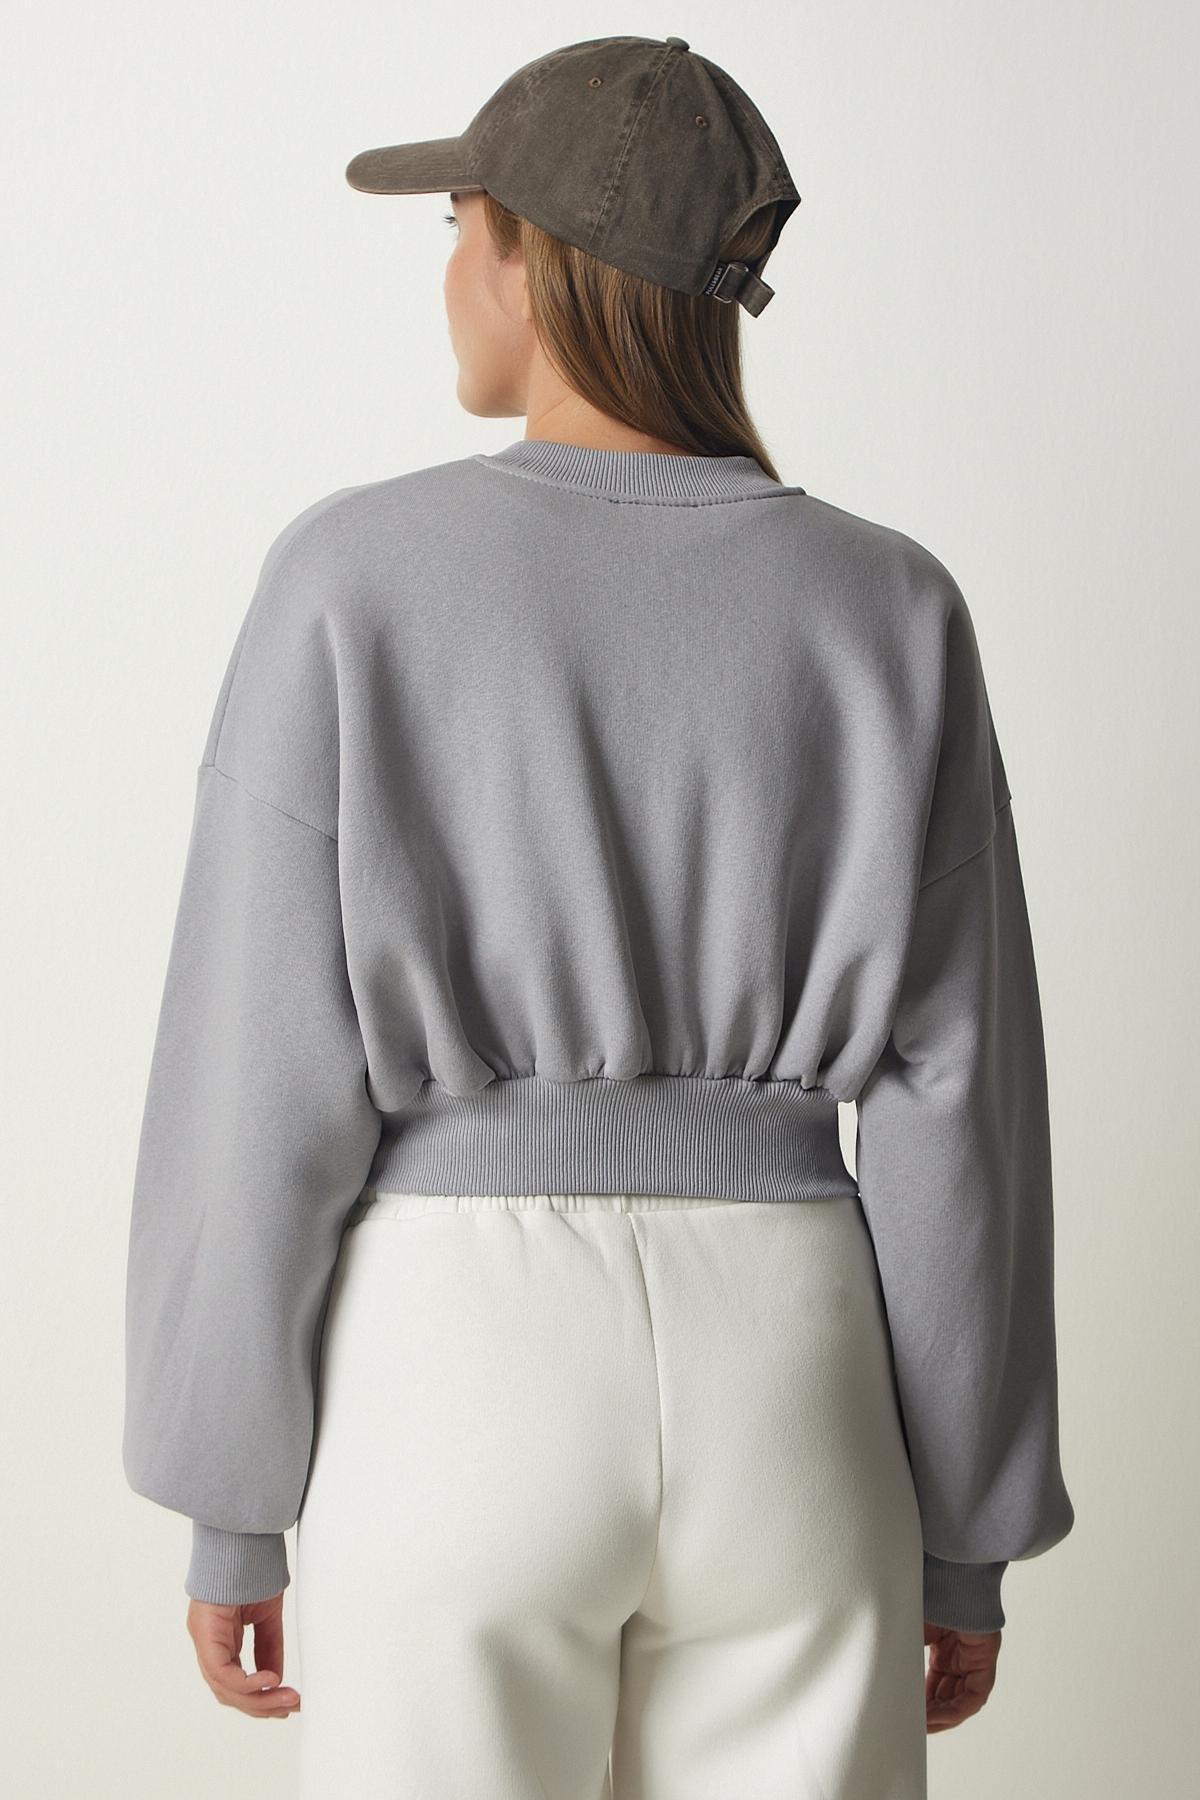 Happiness Istanbul - Grey Zippered Crop Knitted Sweatshirt